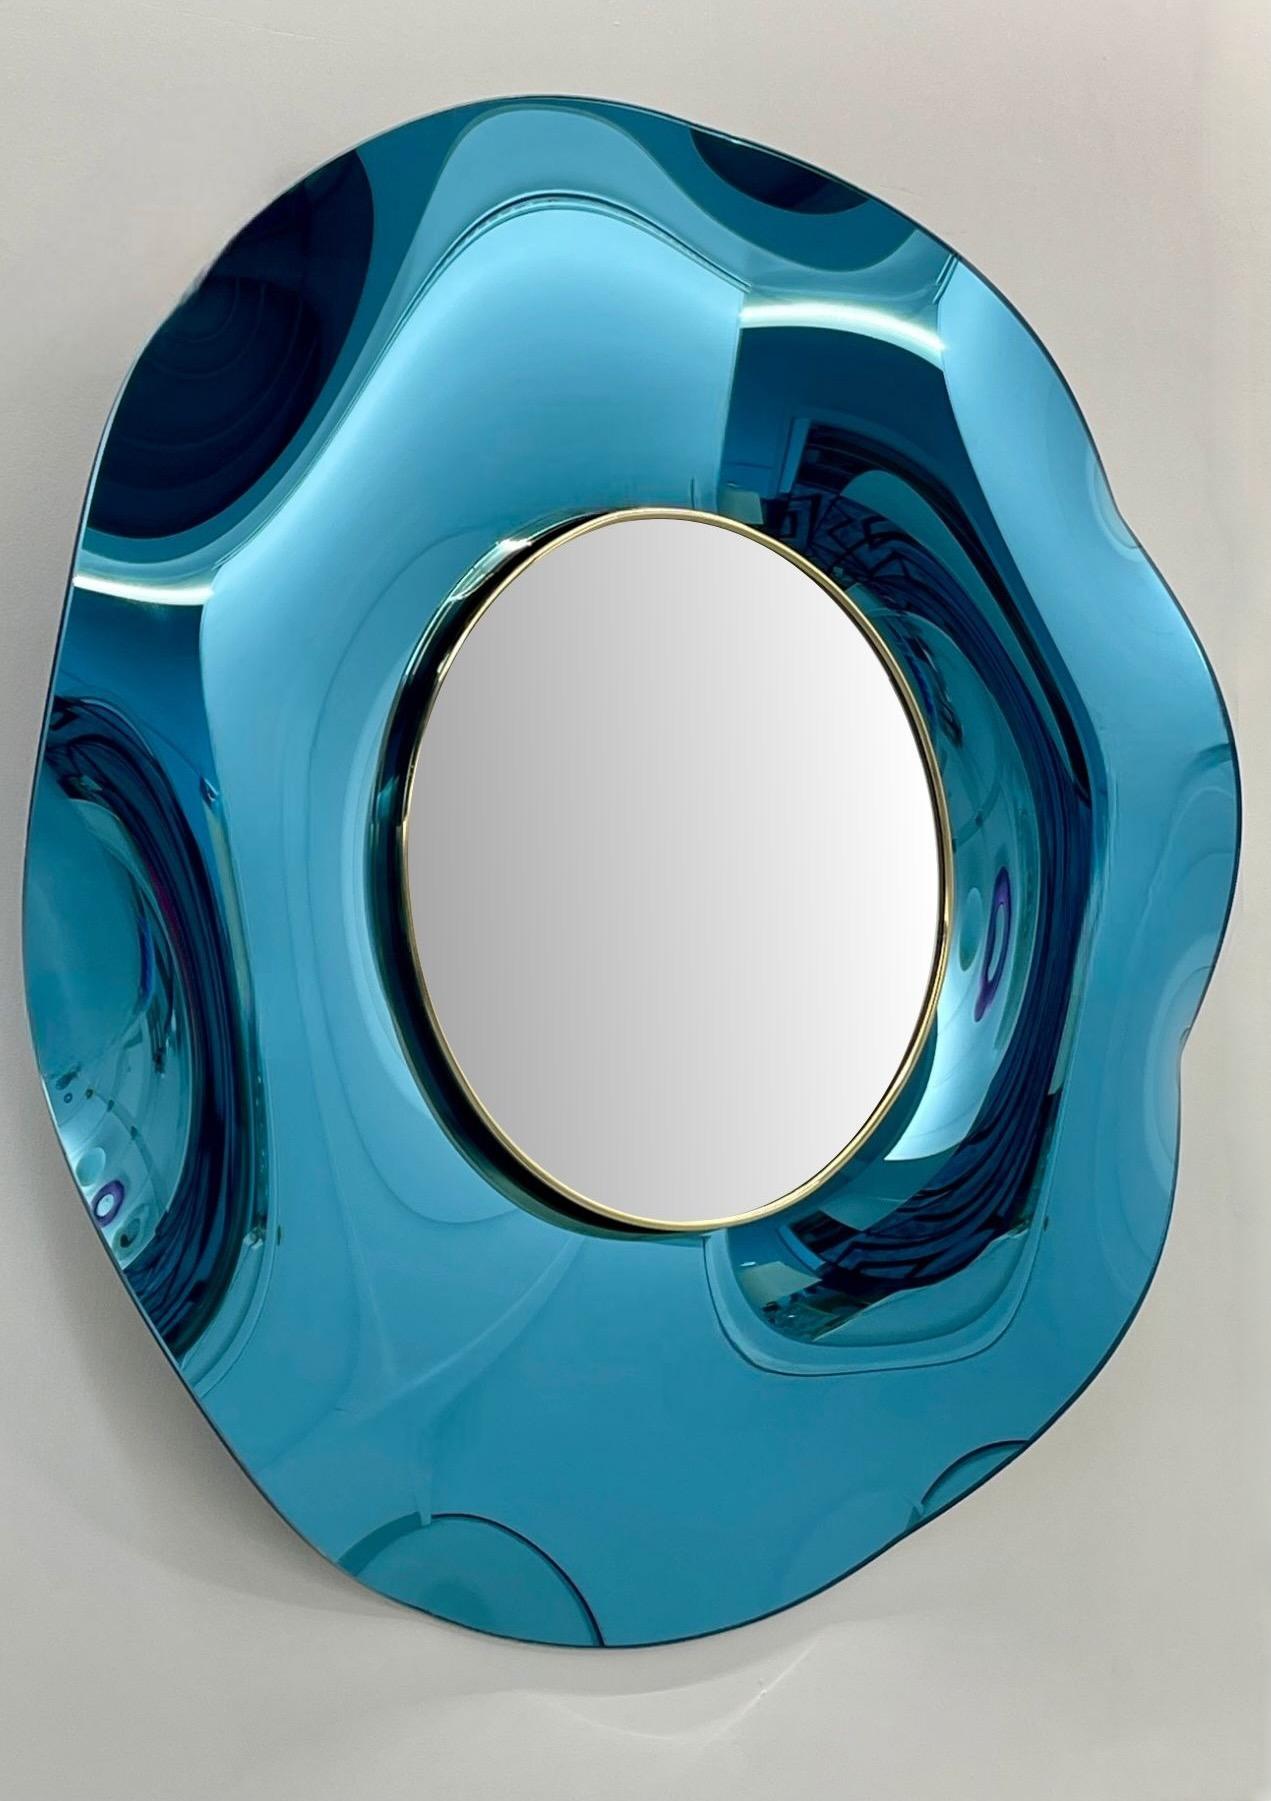 'Undulate' Handmade Celestial Blue Crystal Mirror Dia.40'' by Ghiró Studio In New Condition For Sale In Pieve Emanuele, Milano